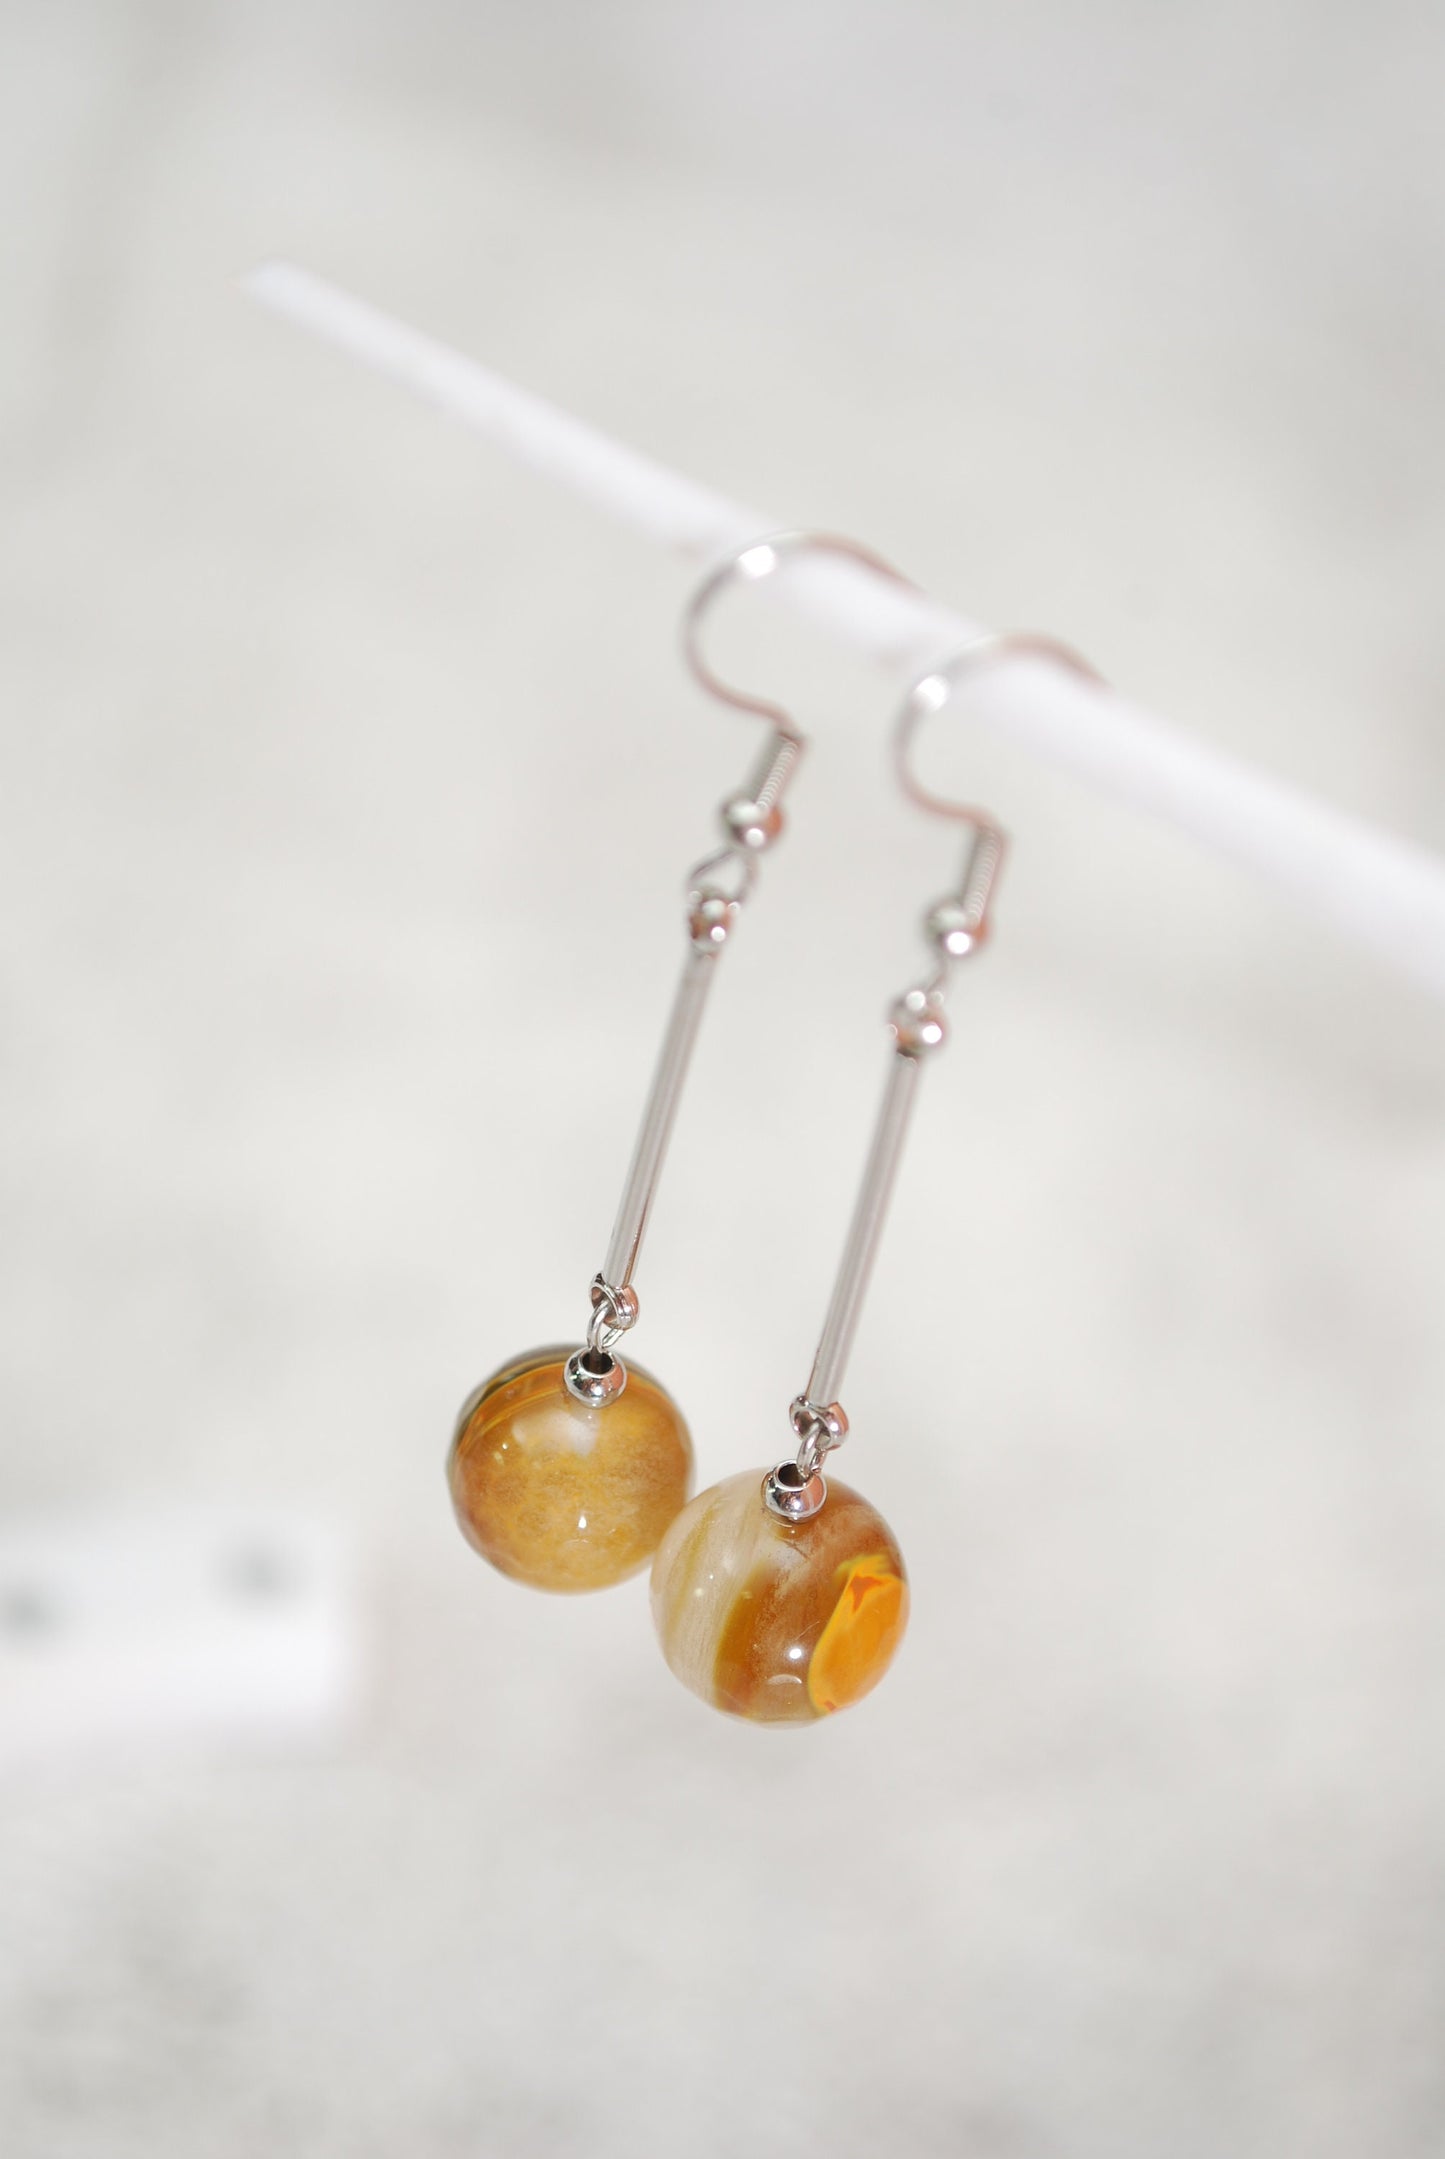 Handcrafted Boho Agate Earrings by Estibela - Versatile for Any Occasion, 6cm  2.5"